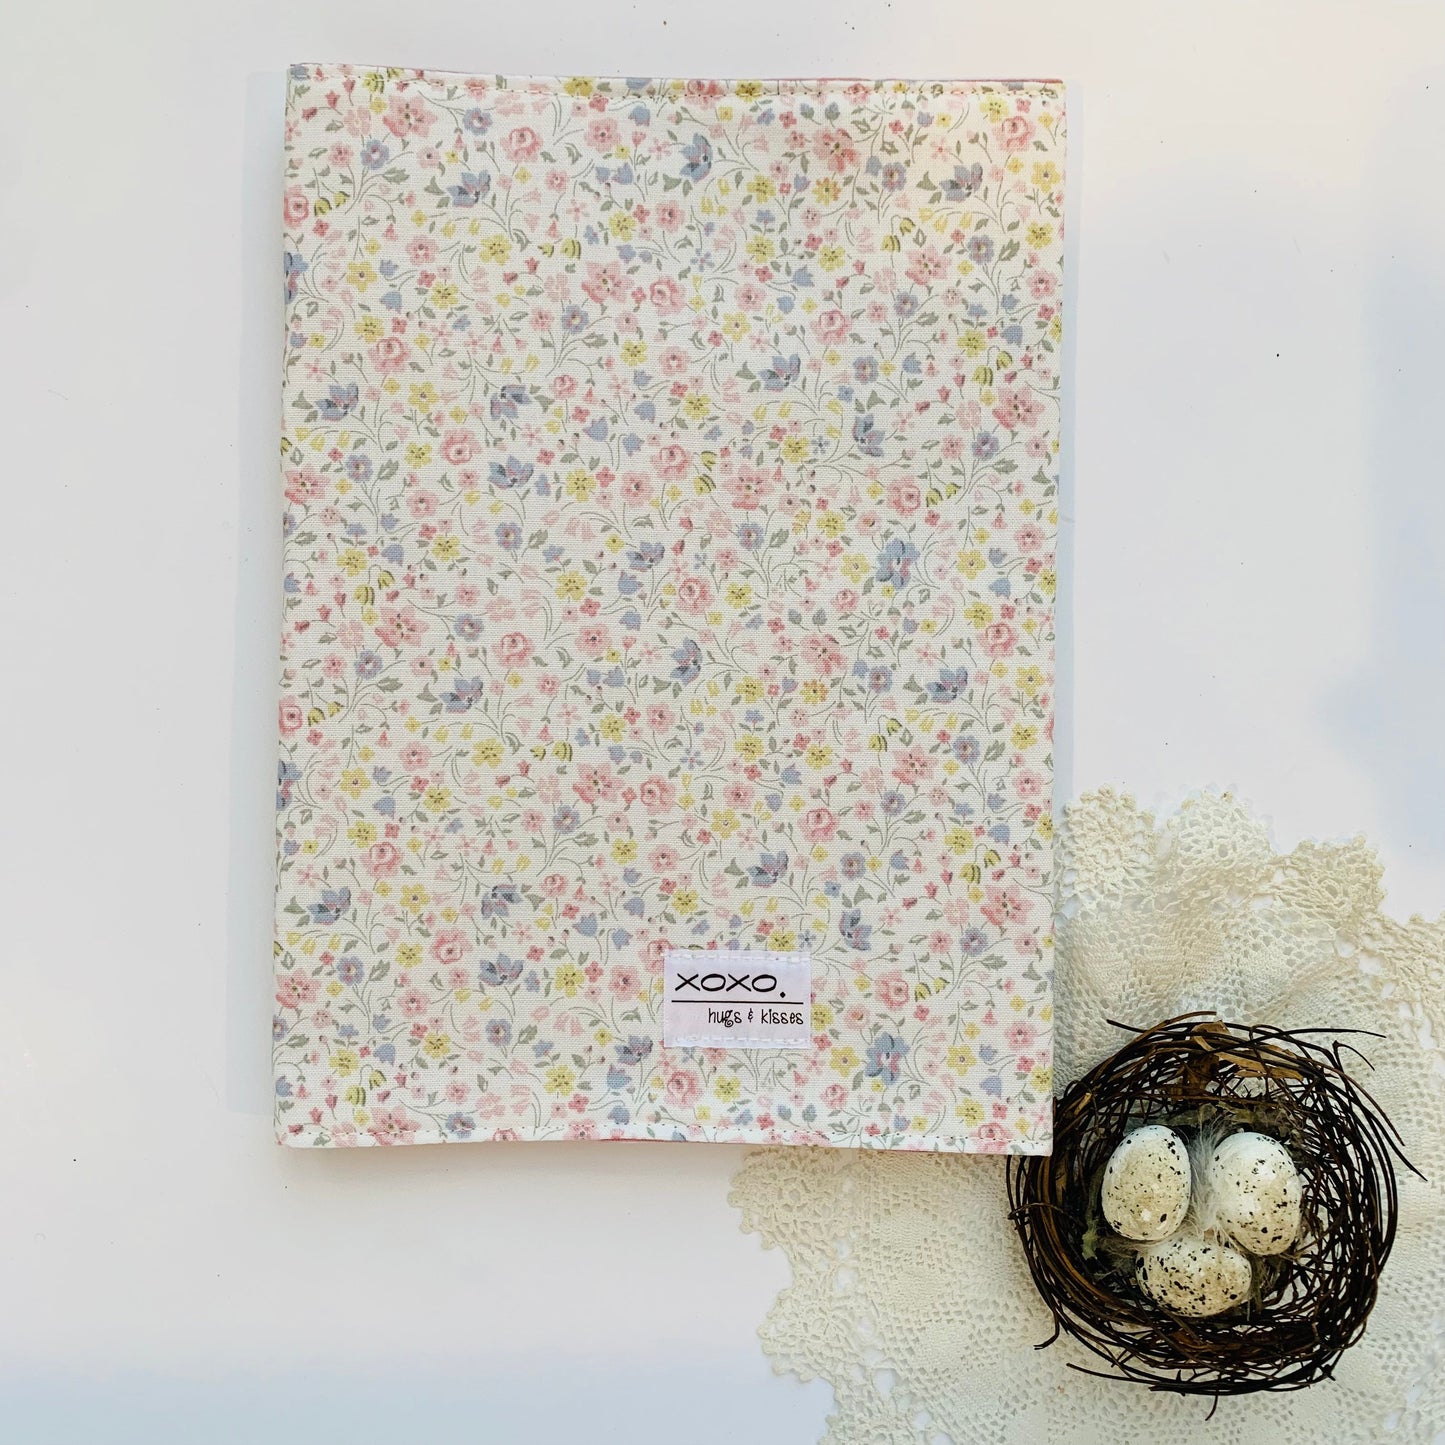 Plunket Book Covers - Floral